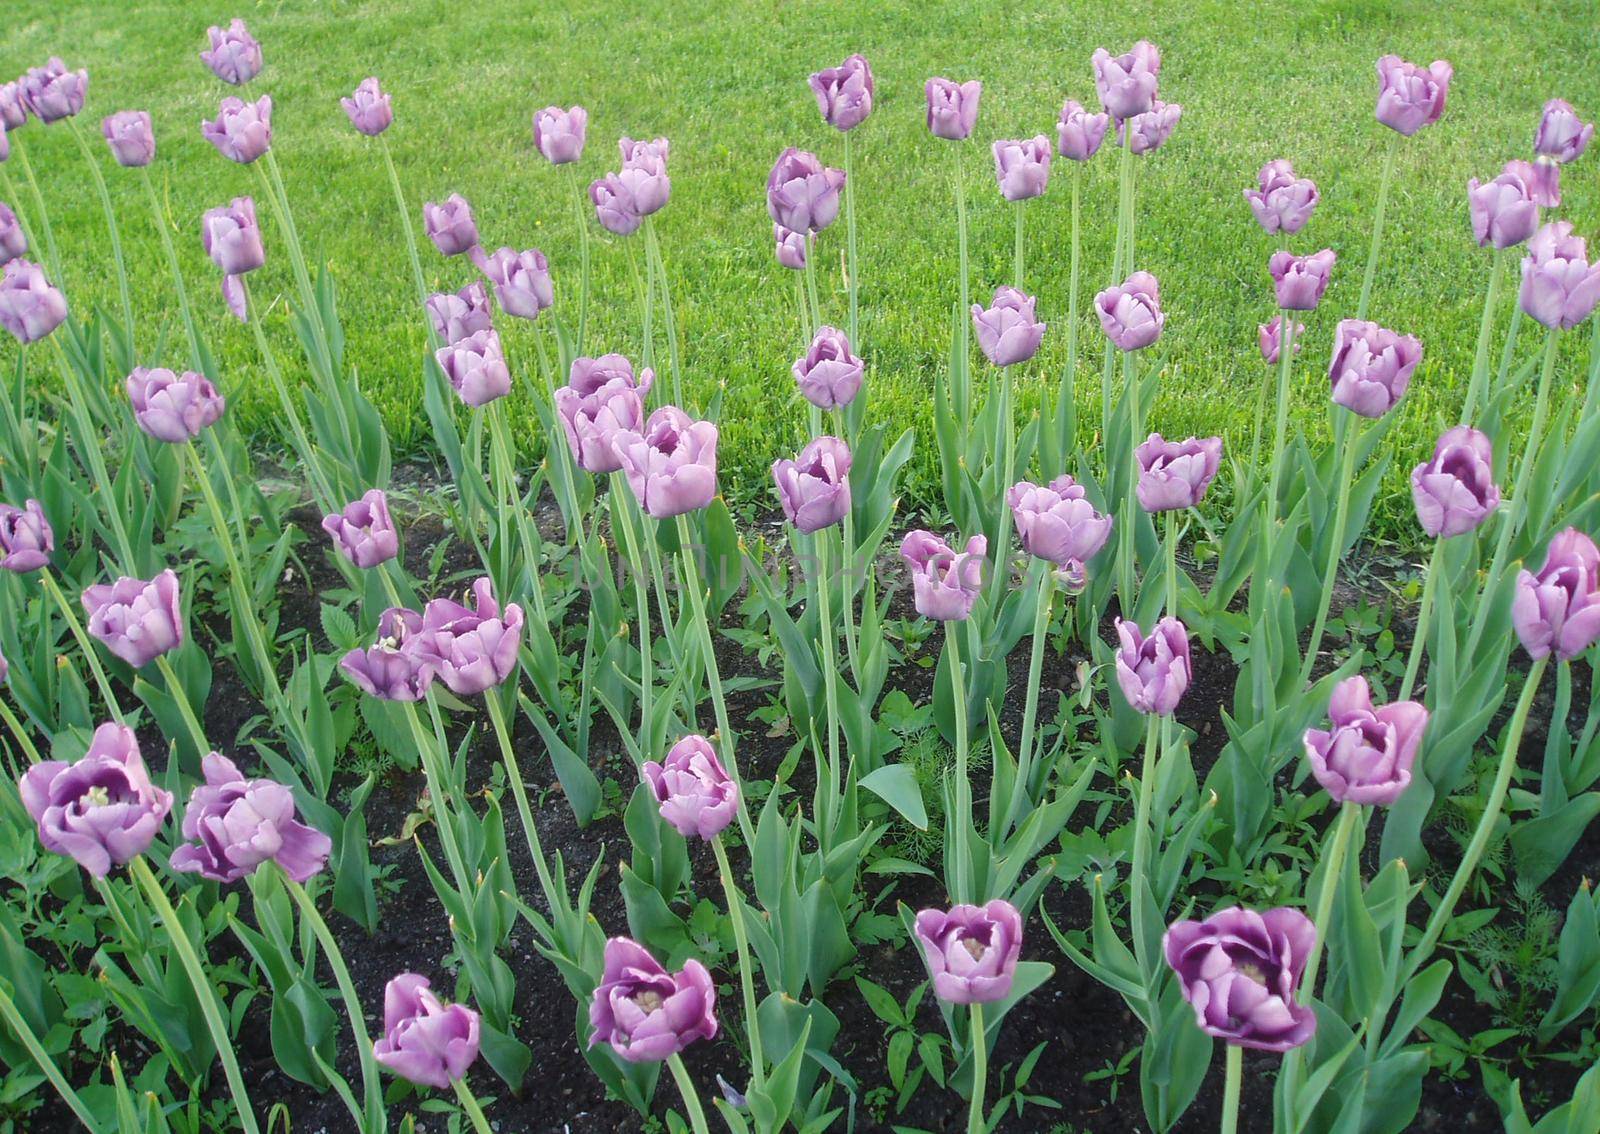 Flowerbed with purple tulips. Blooming tulips